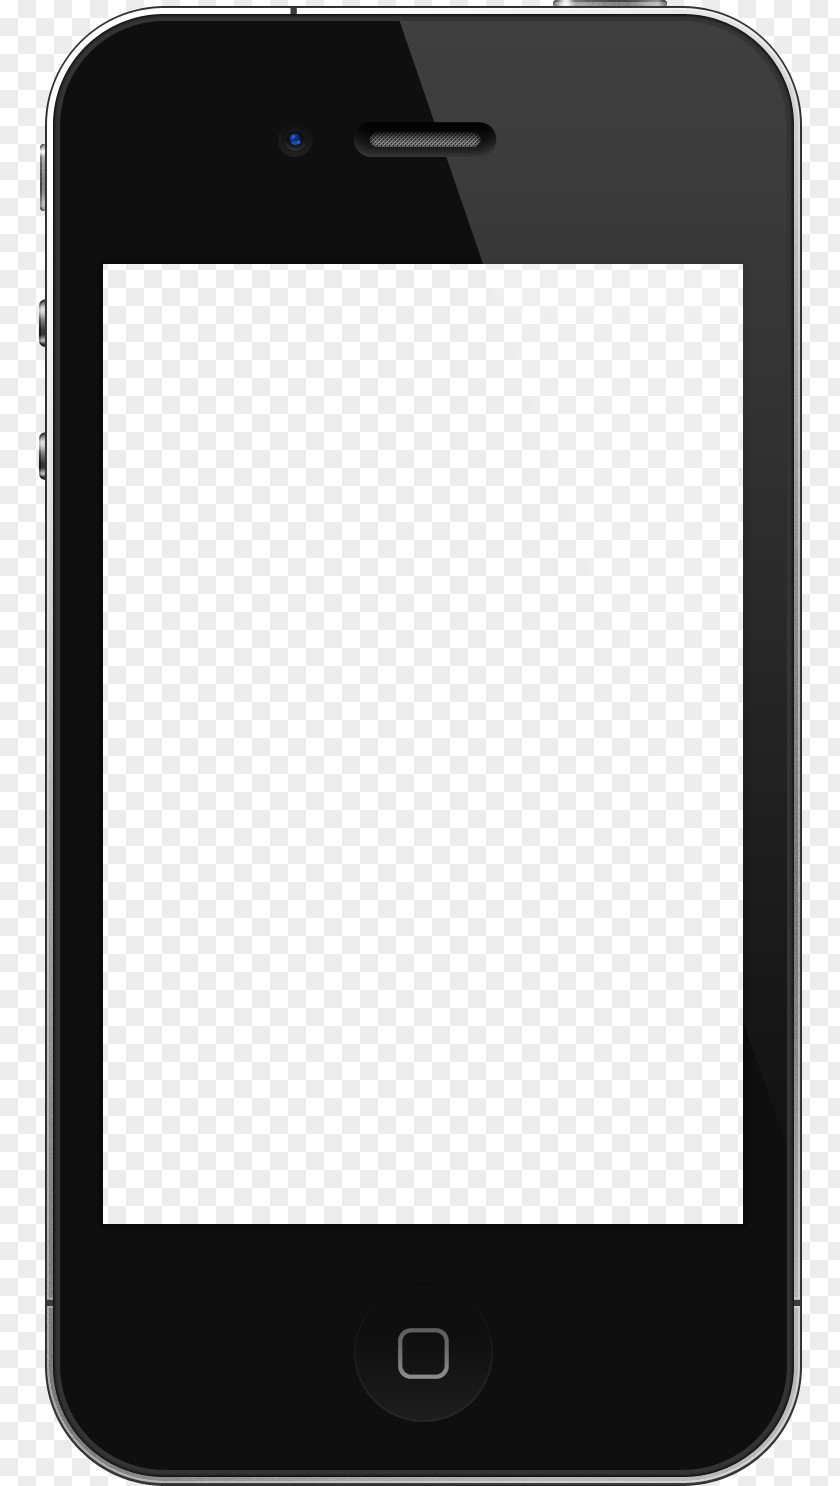 Iphone Apple IPhone 4 6 IPod Touch Template PNG